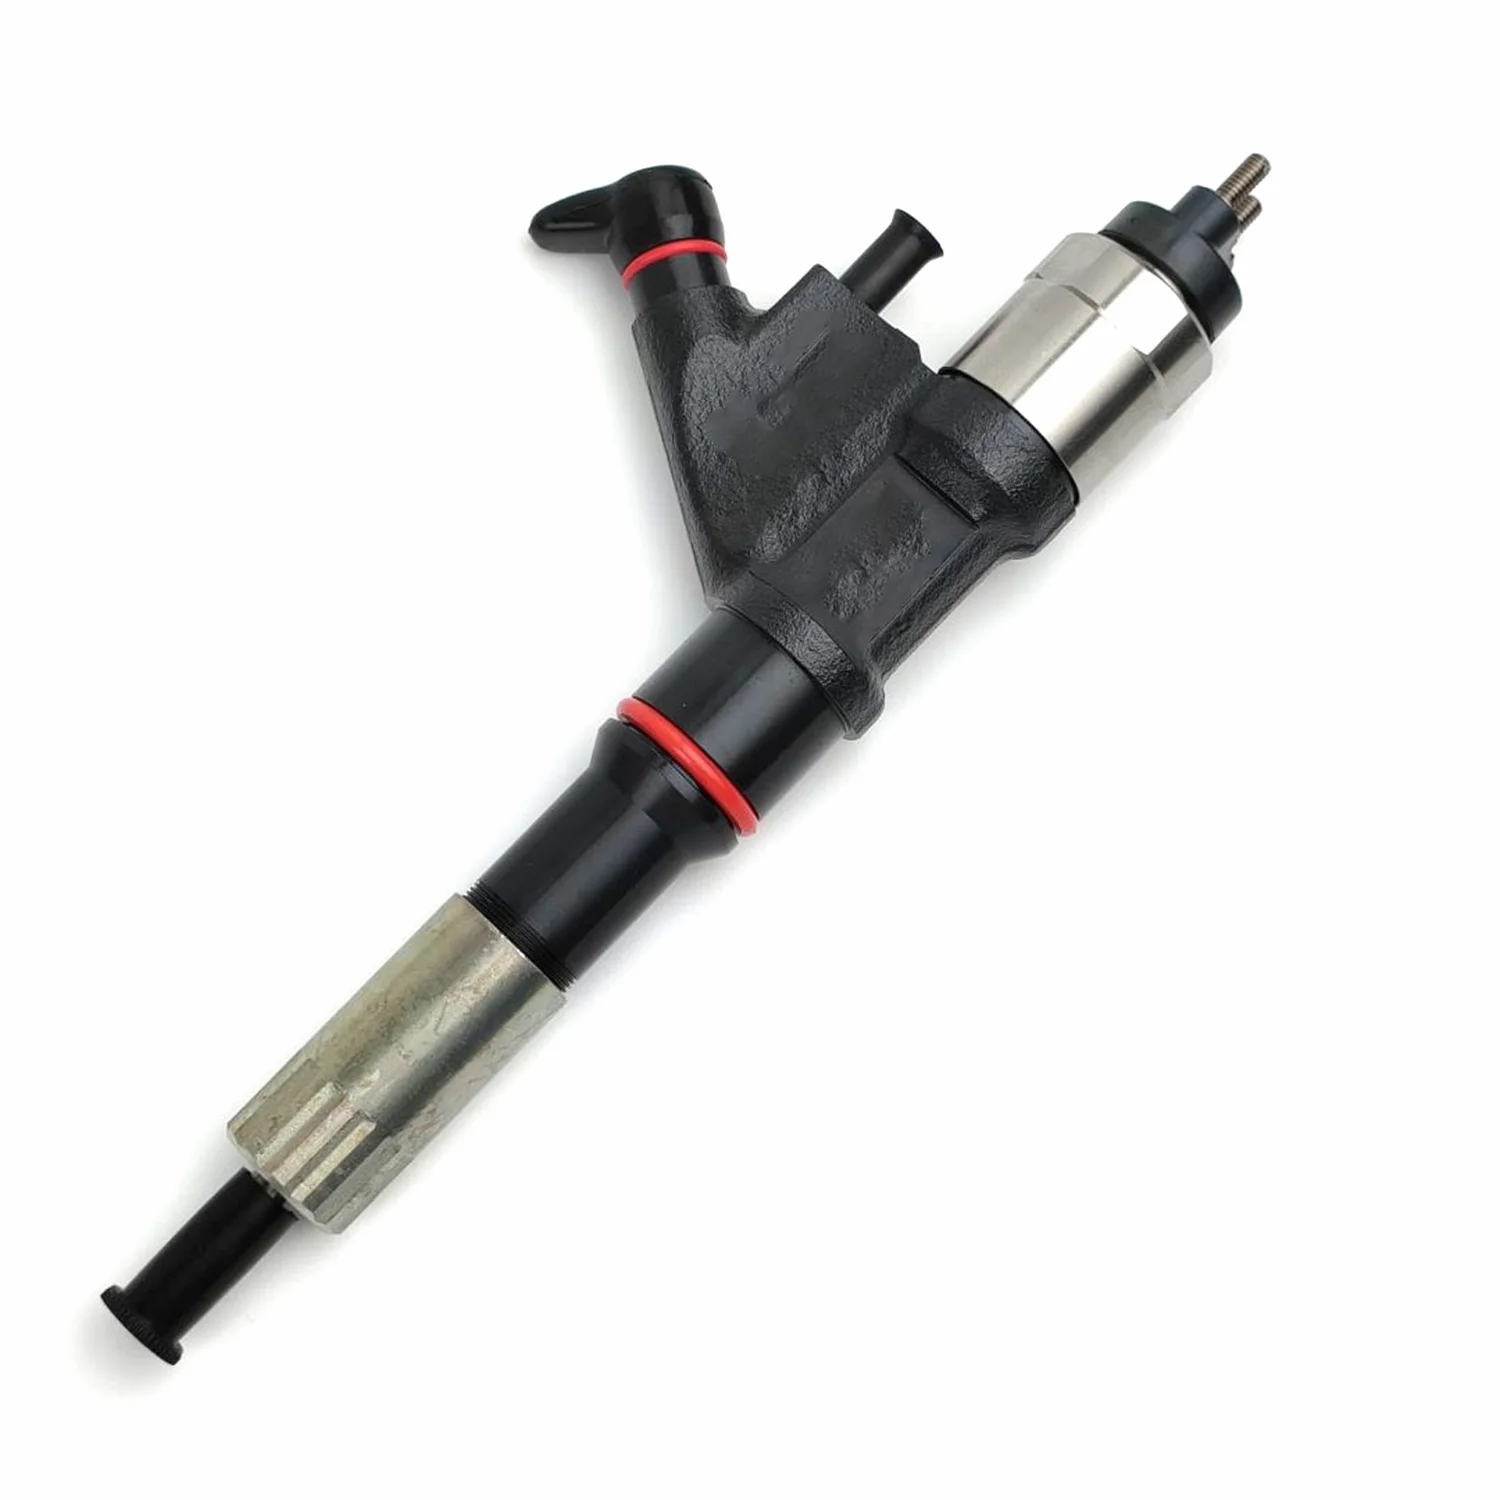 1pc Fuel Injector Fit For Denso HOWO Ssangyong 06K06116 095000-6701 R61540080017A 0950006701 Excavator part